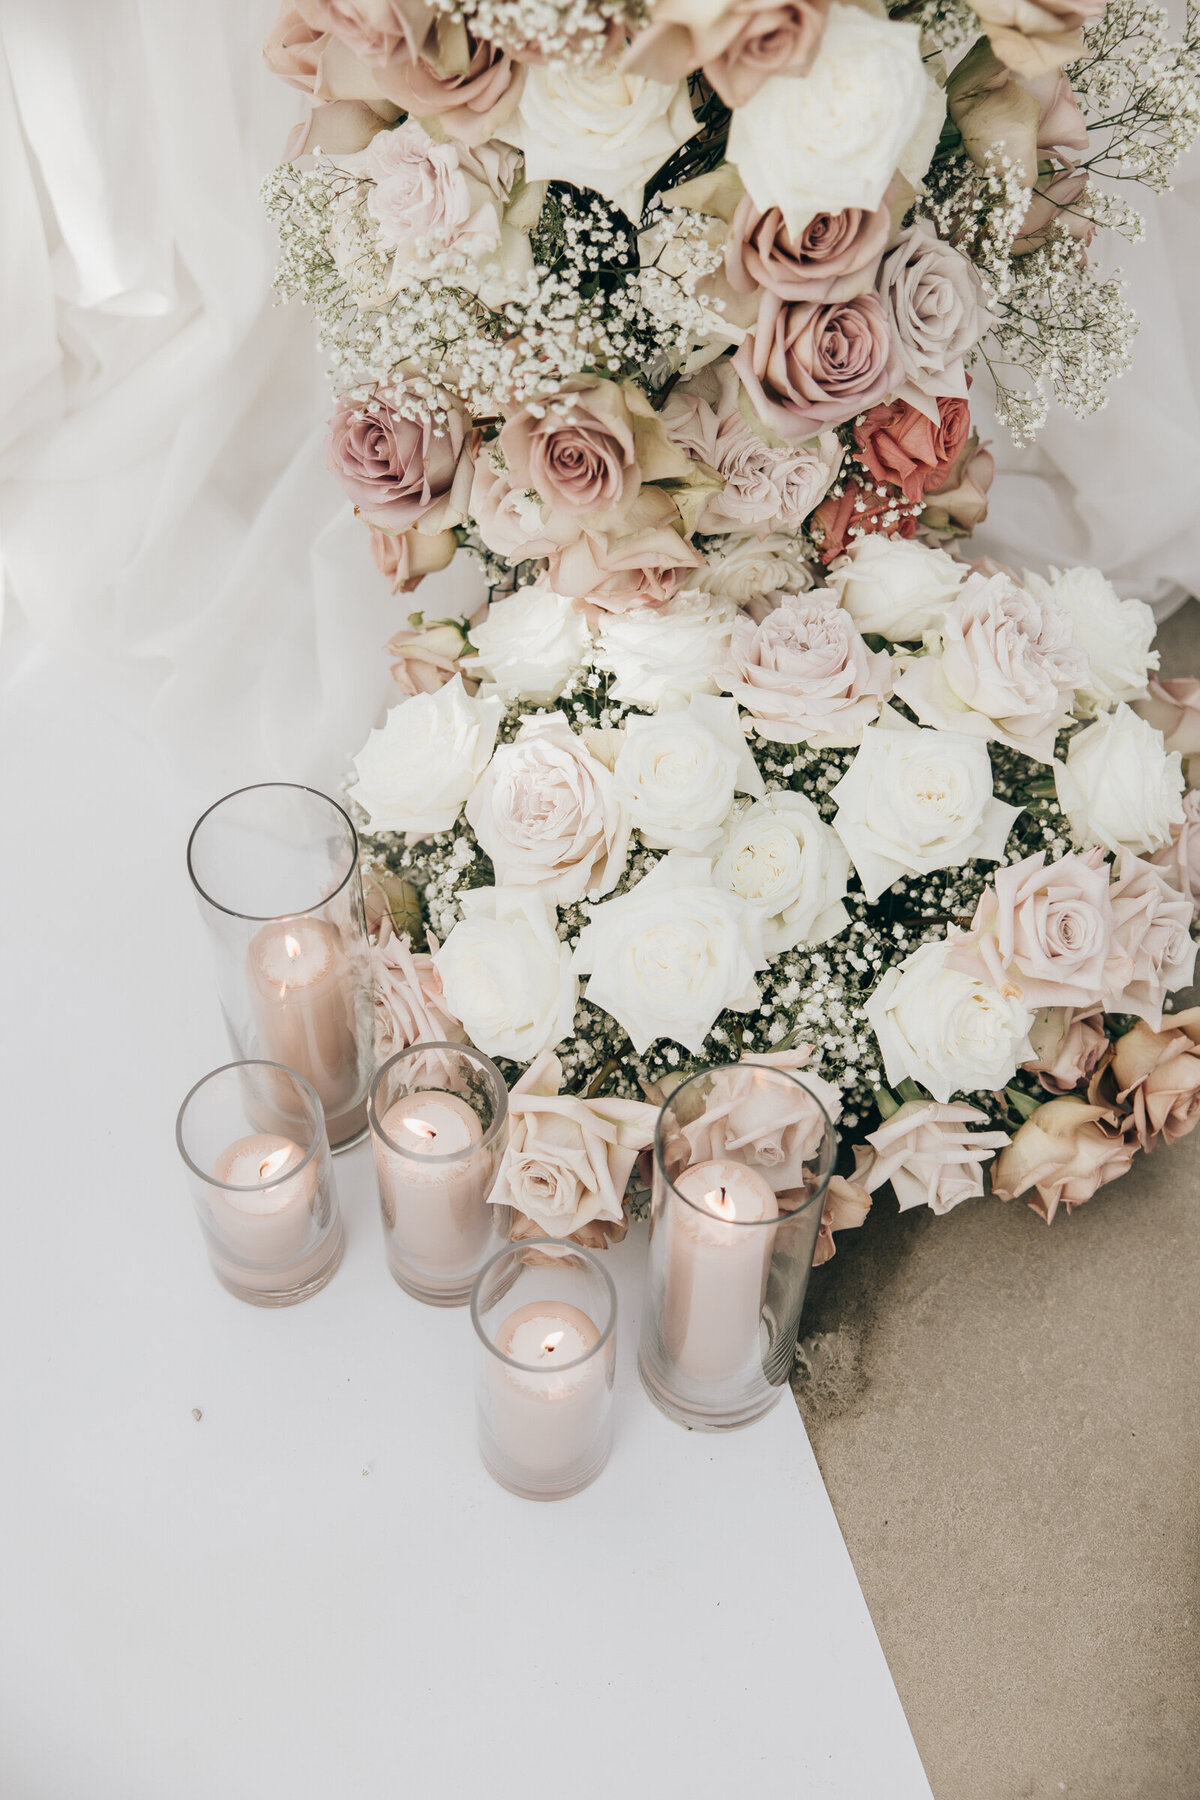 Detail shot of perfect pink and white roses, lavender candles, and baby's breath at luxurious wedding